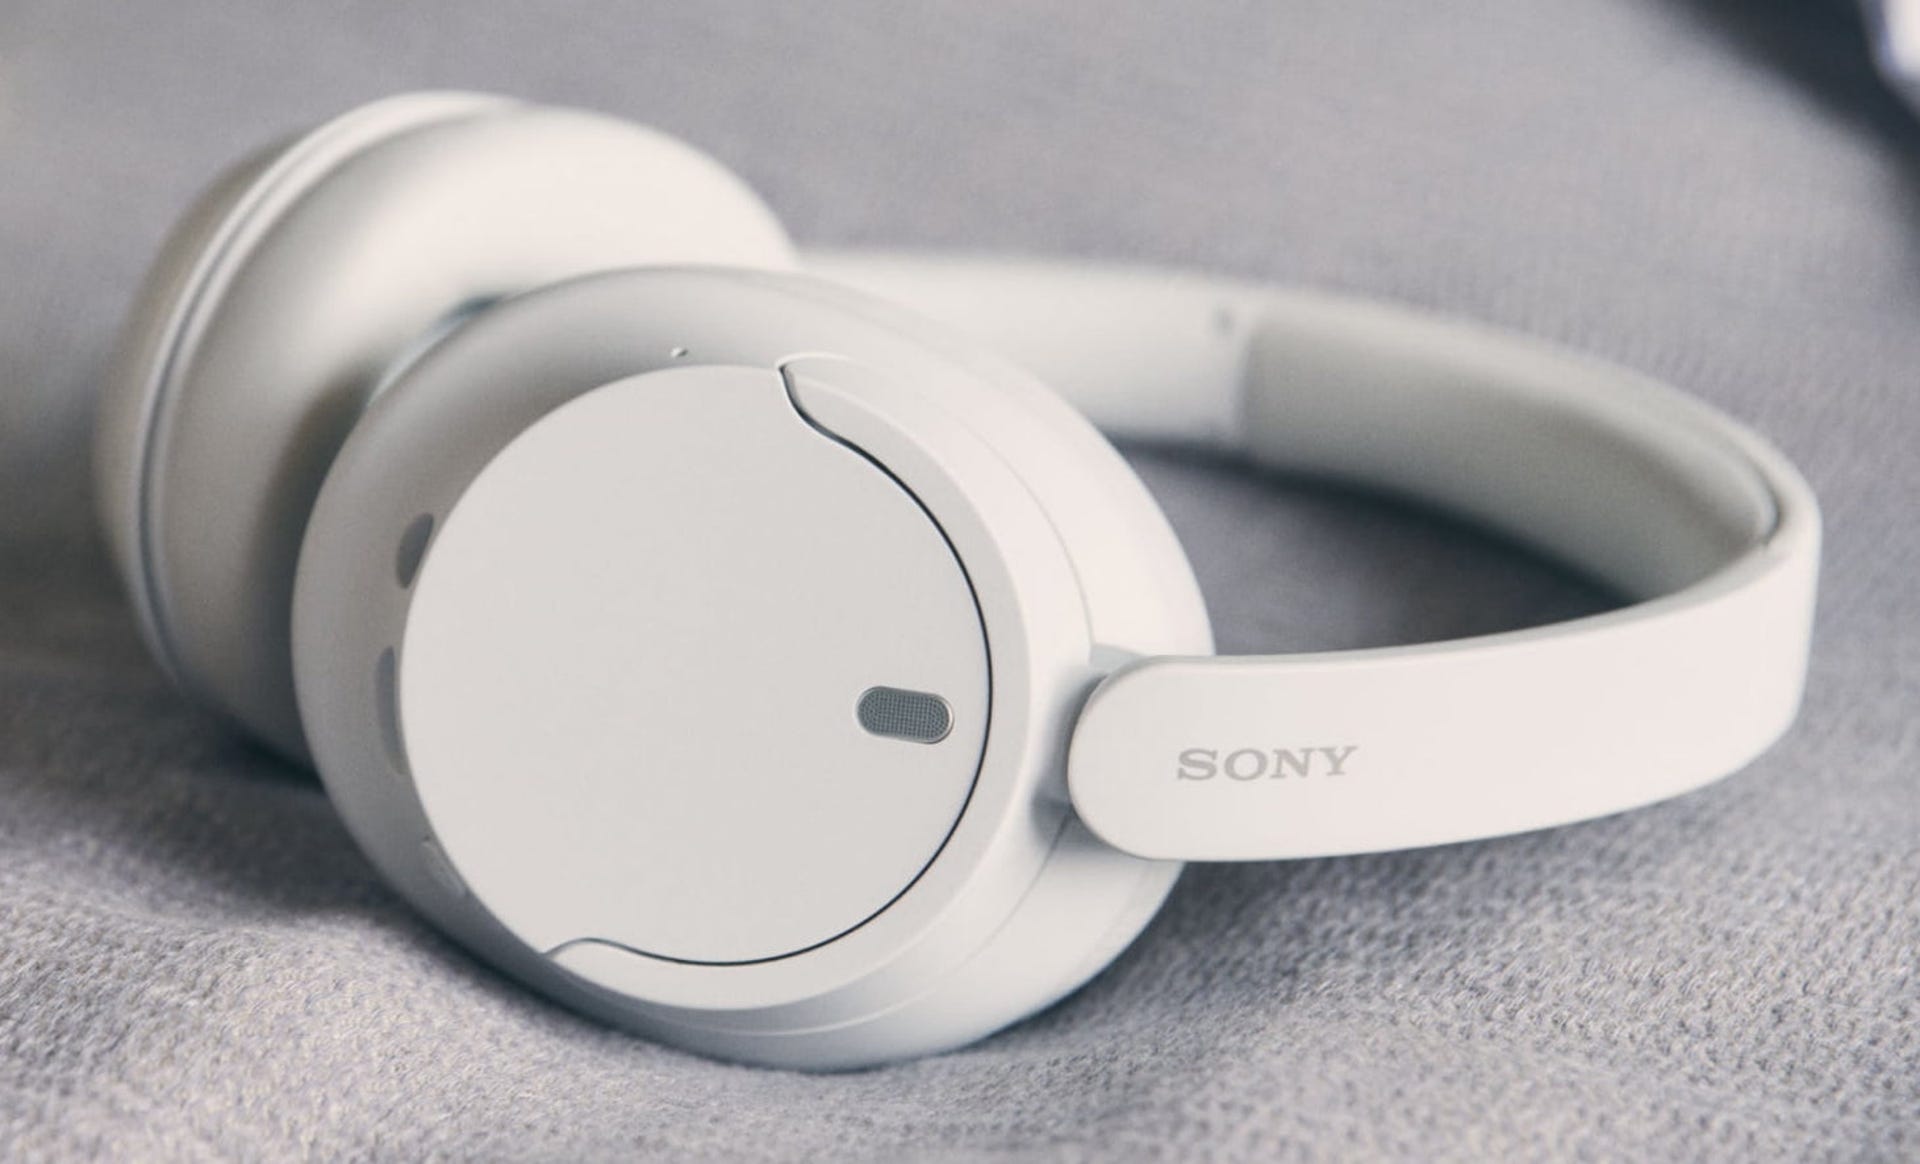 The CH-720N are Sony's new entry-level noise-canceling headphones